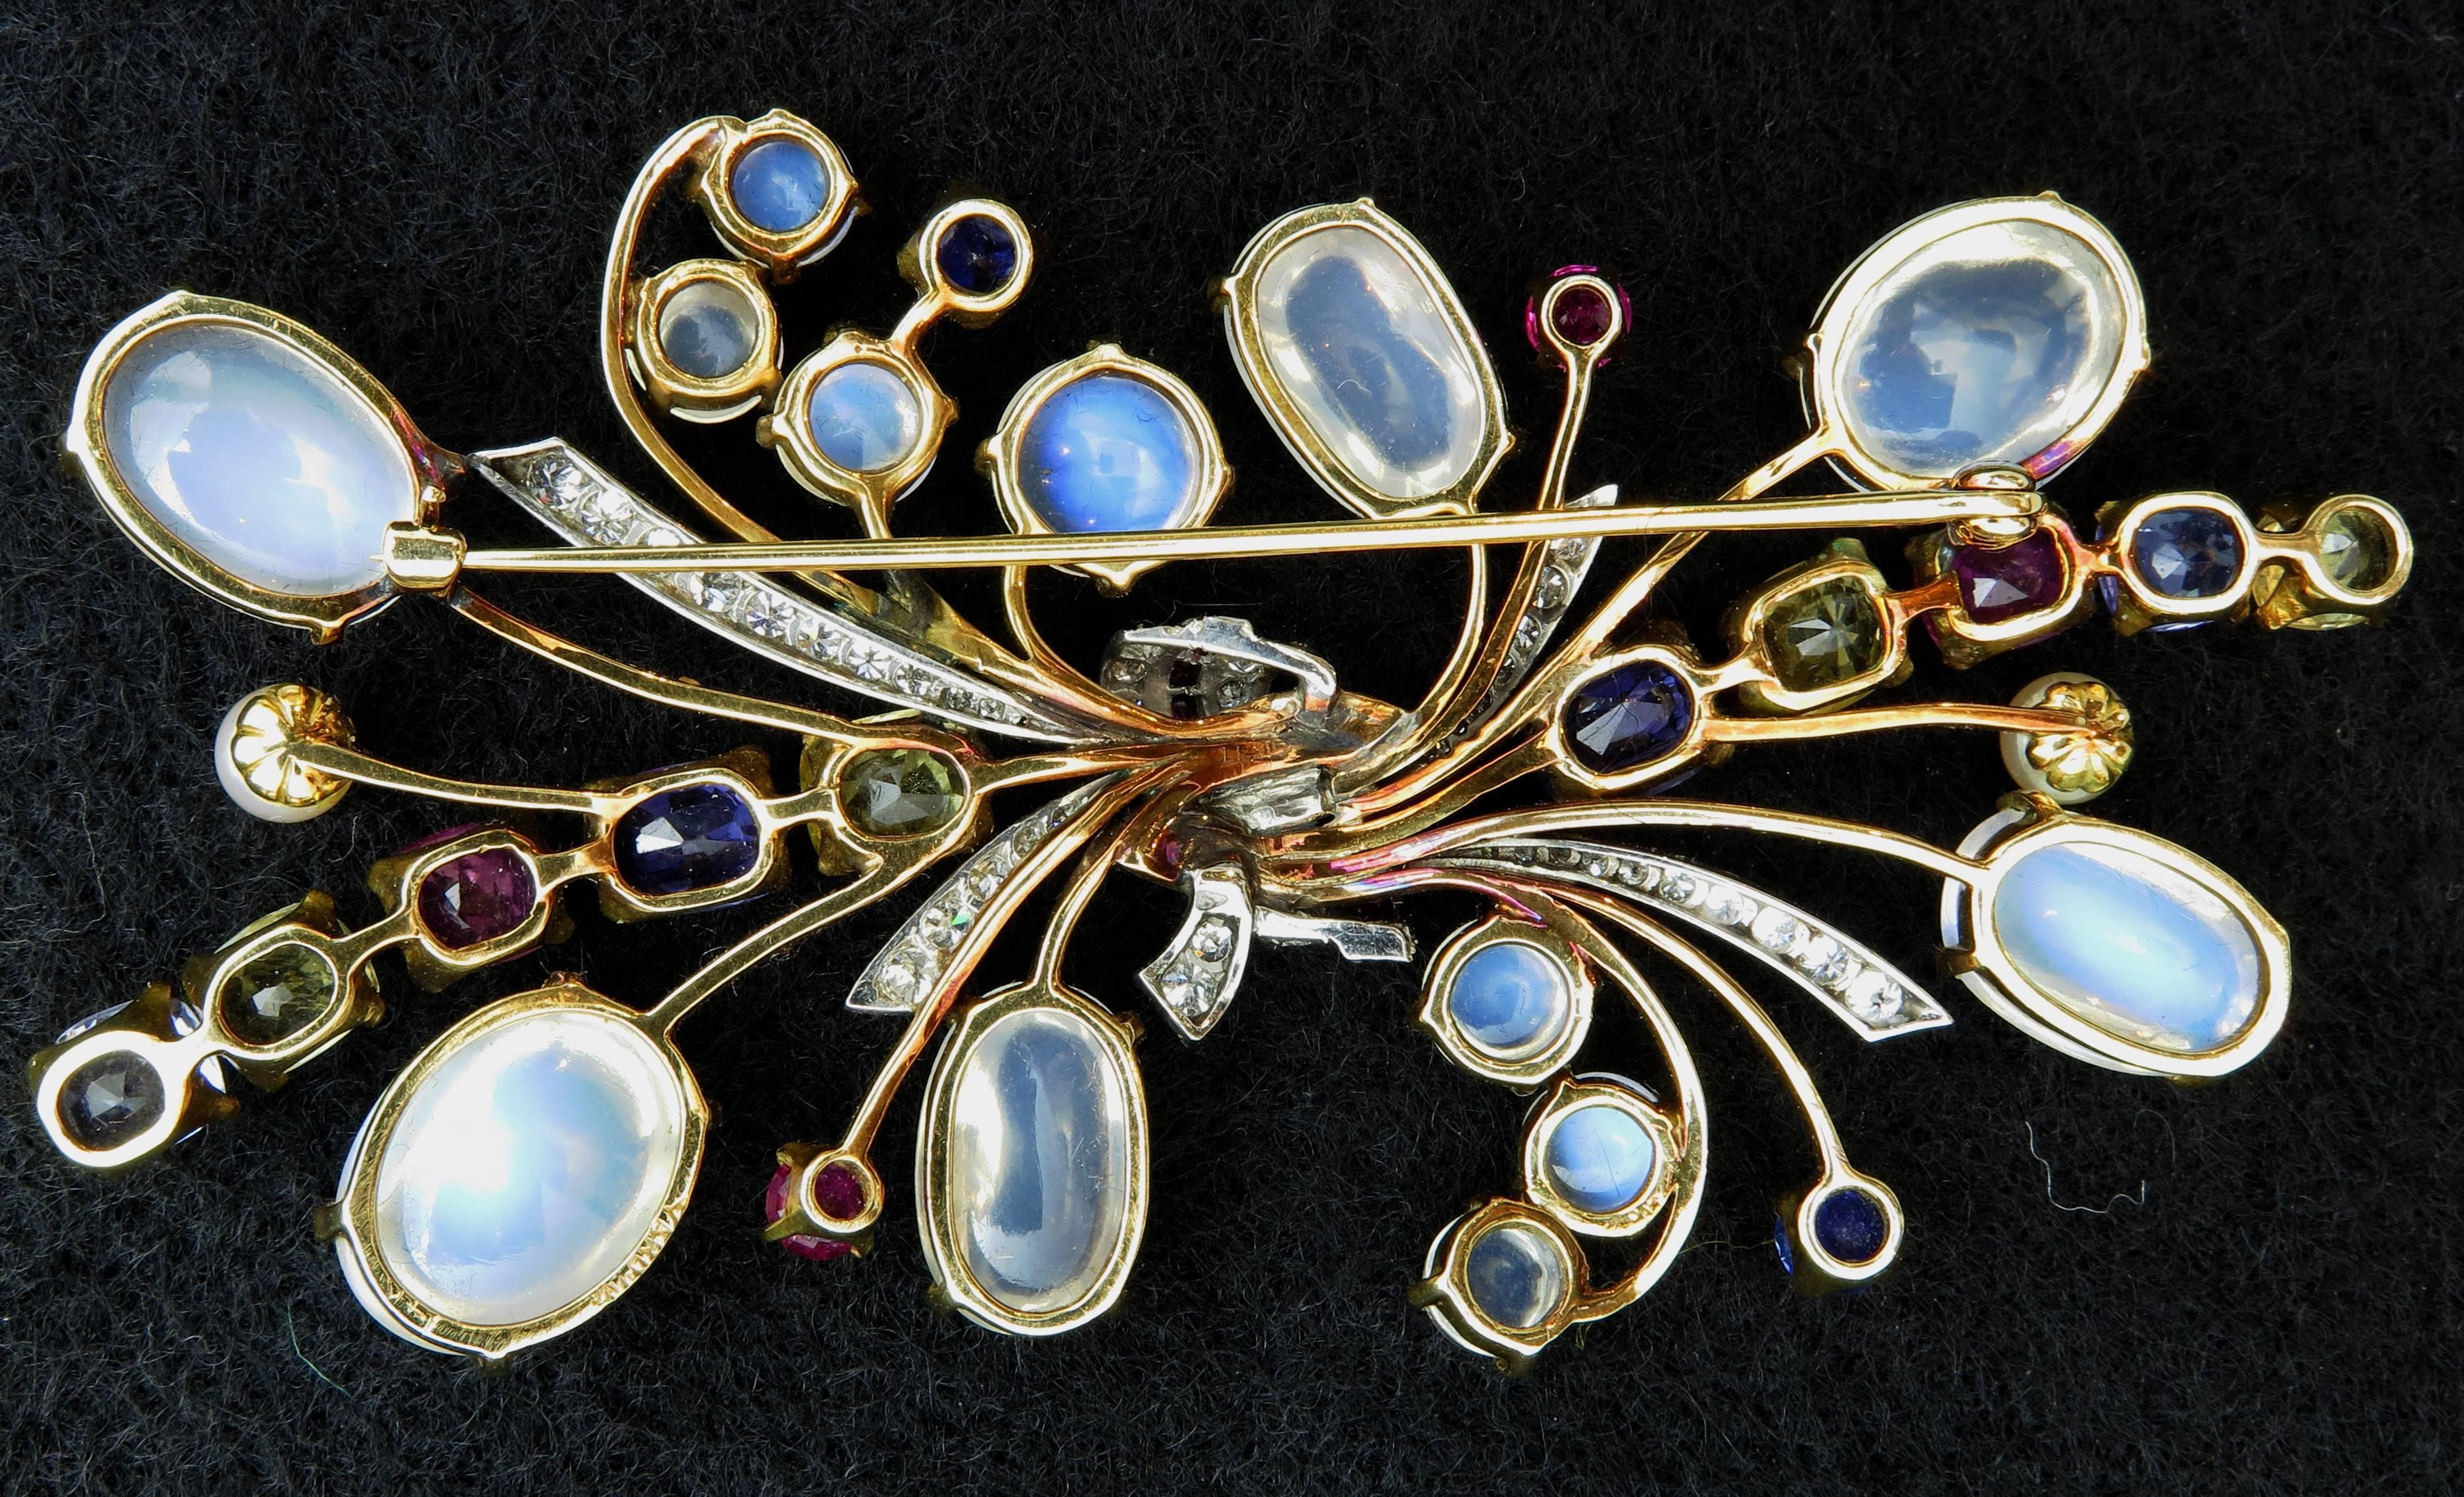 A large and beautiful hand crafted yellow and white 14K gold brooch with total approximately 45 carats of moonstones, 14 carats of sapphires, 1.04 carats of rubies, 1.1 carats of diamonds and 2 culture pearls.

The moonstones are transparent white